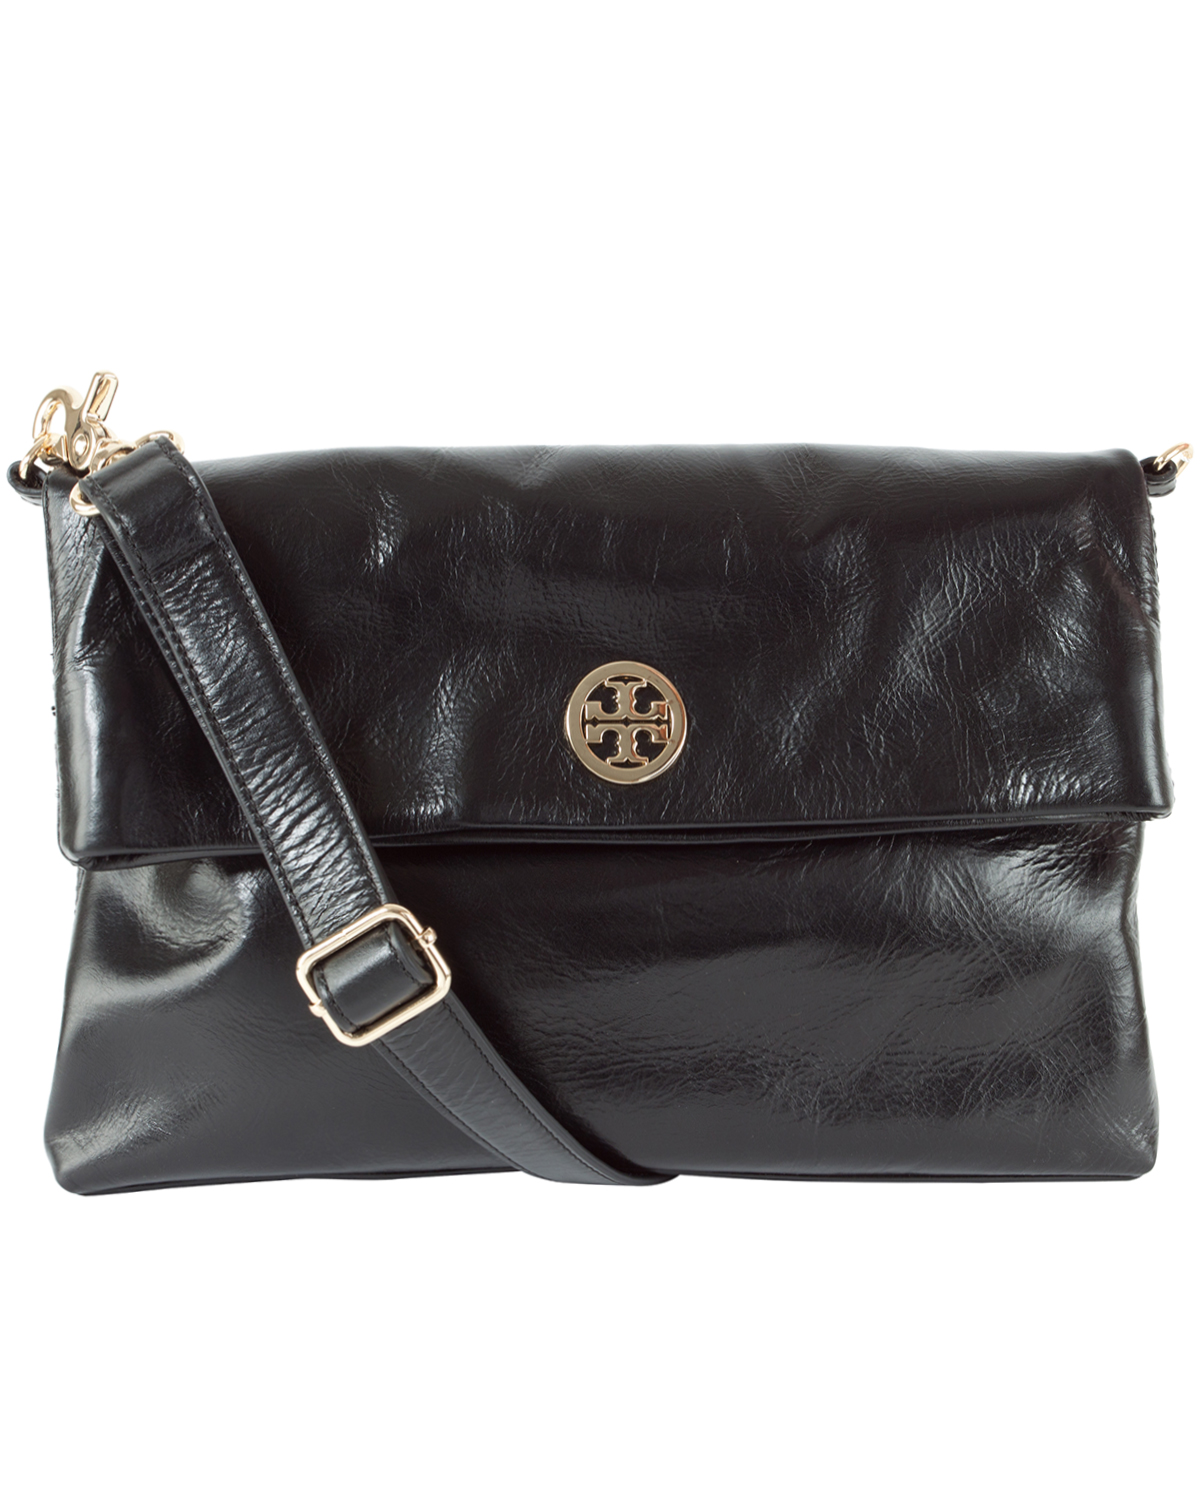 Tory Burch Bag Made In China Flash Sales, 59% OFF 